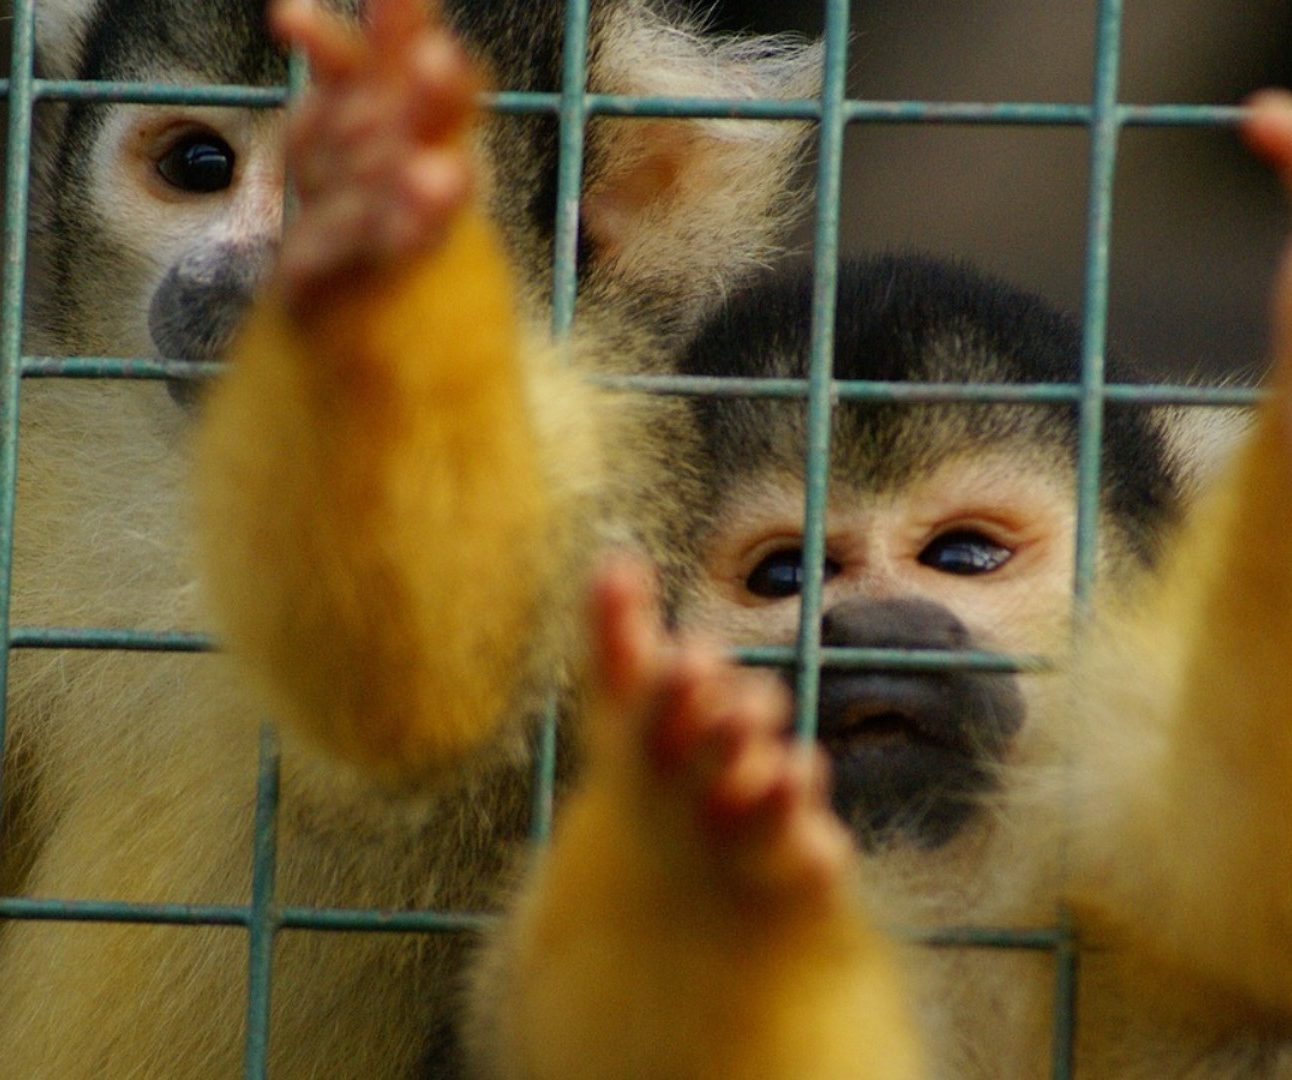 Two spider monkeys desperately clinging to the bars of a cage